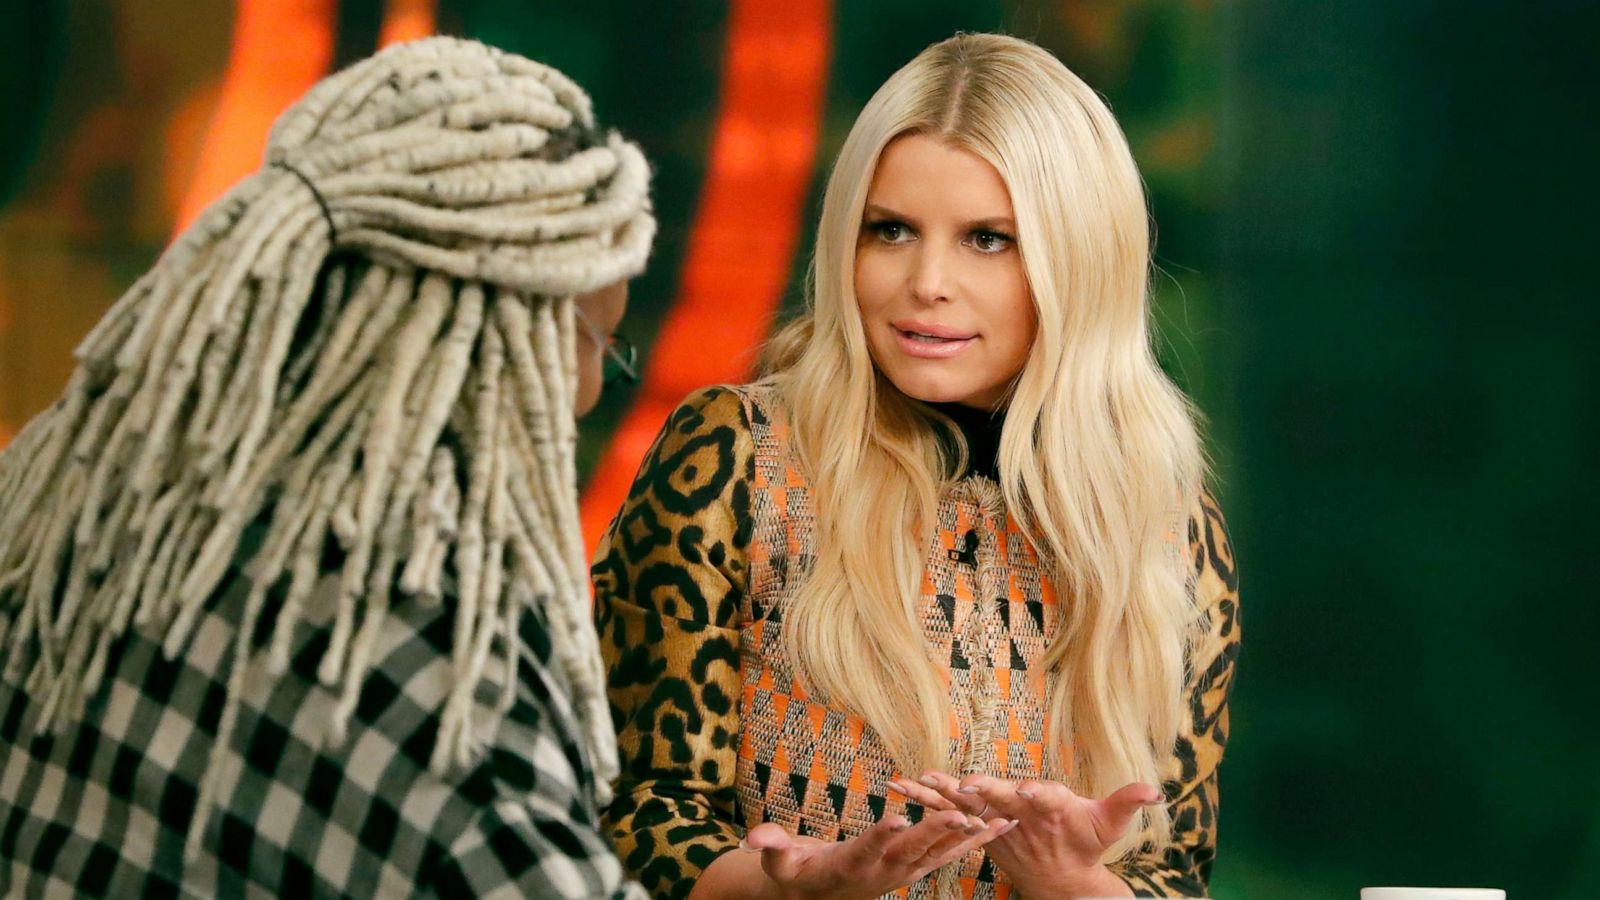 Jessica Simpson On Sobriety Why She Confronted Her Sexual Abuser The Beauty Is In Forgiveness And That S How We Let Go Abc News